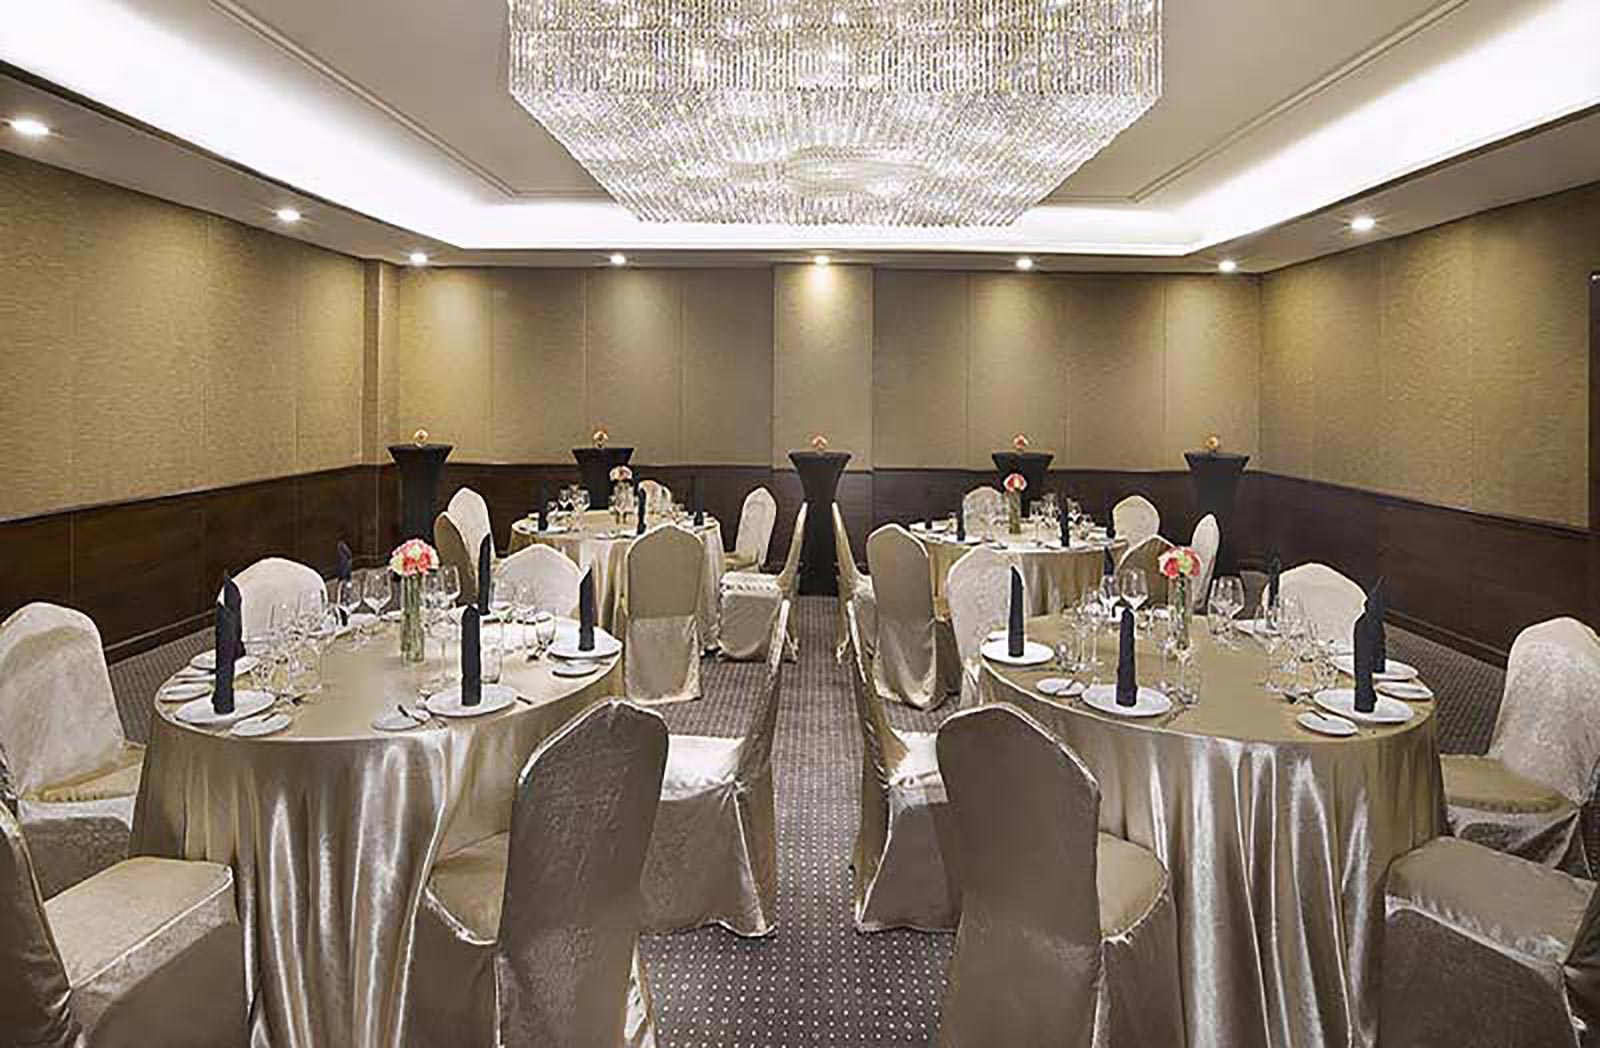 Melbourne Hall - meeting & event space in Dubai